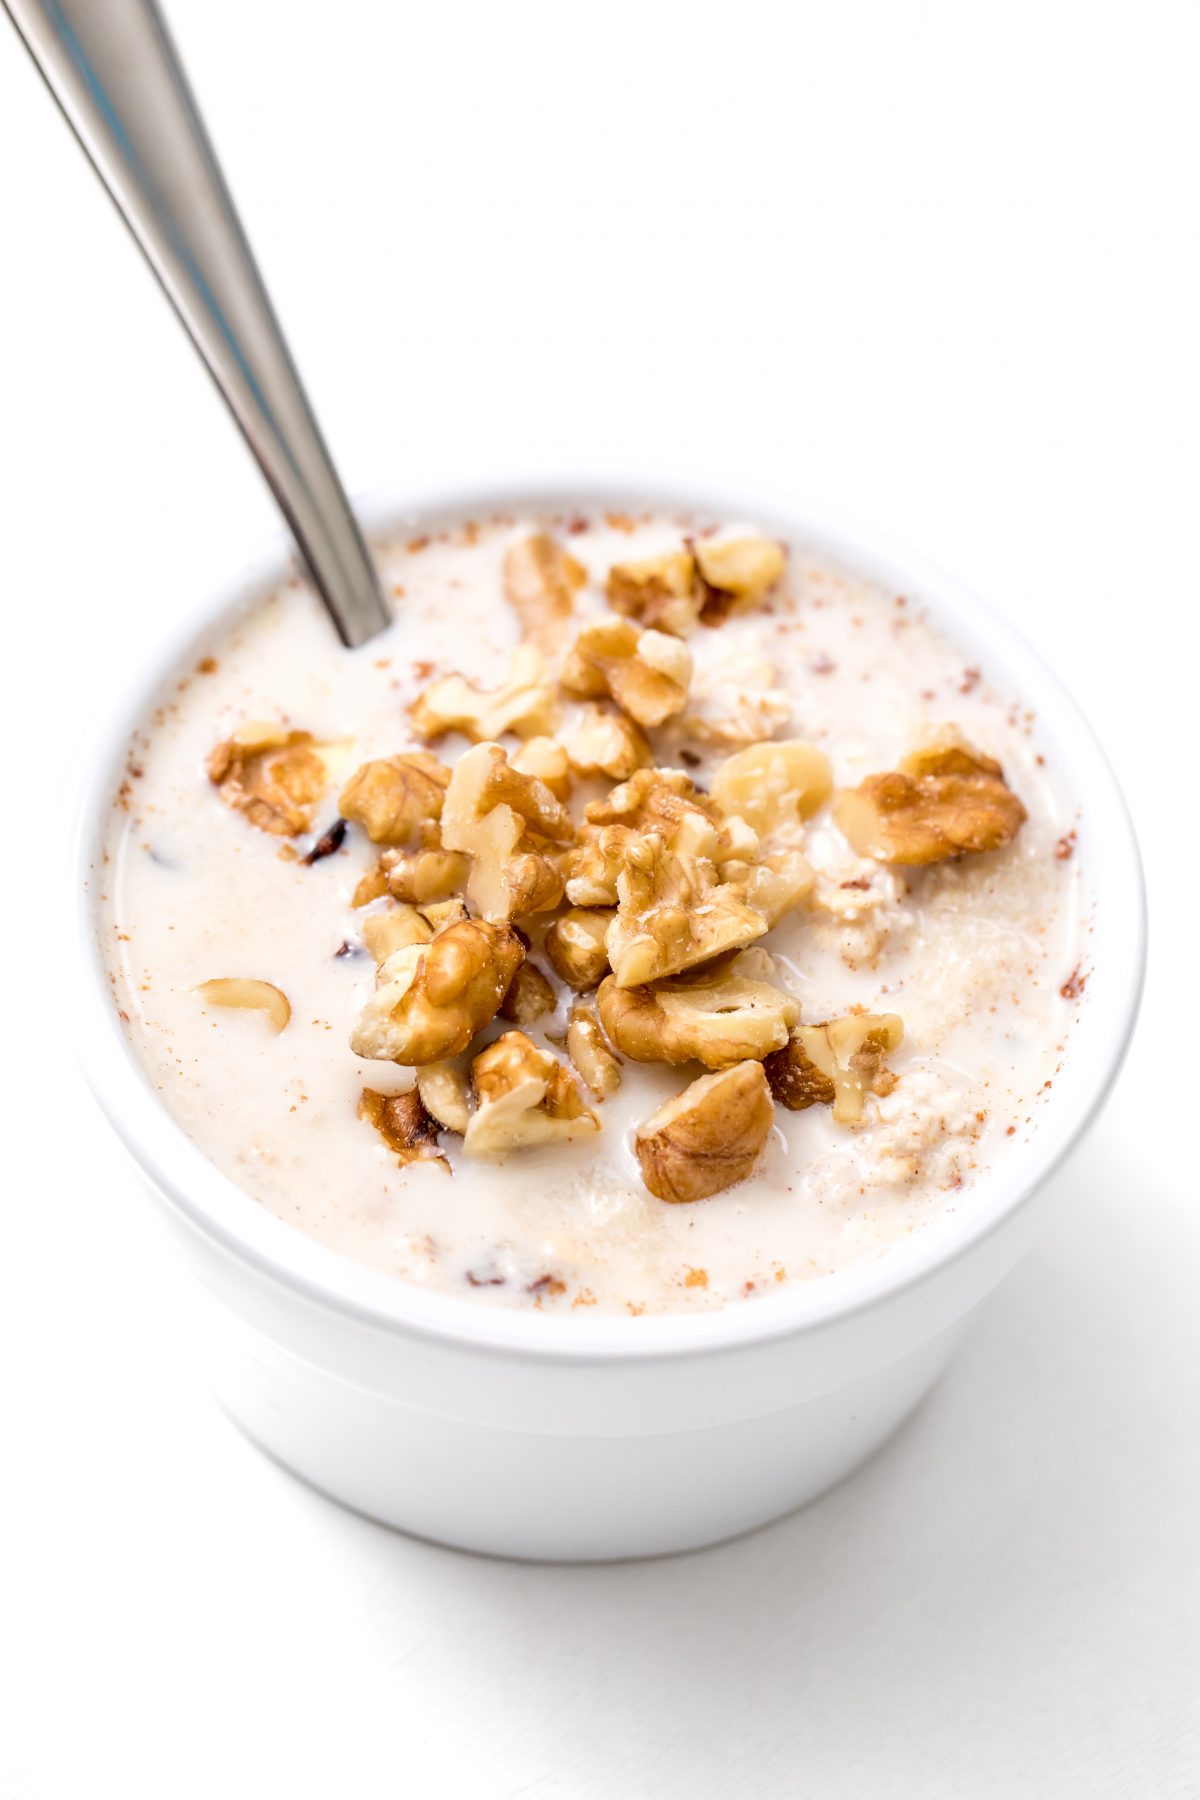 Quick and delicious no-sugar-added overnight oats